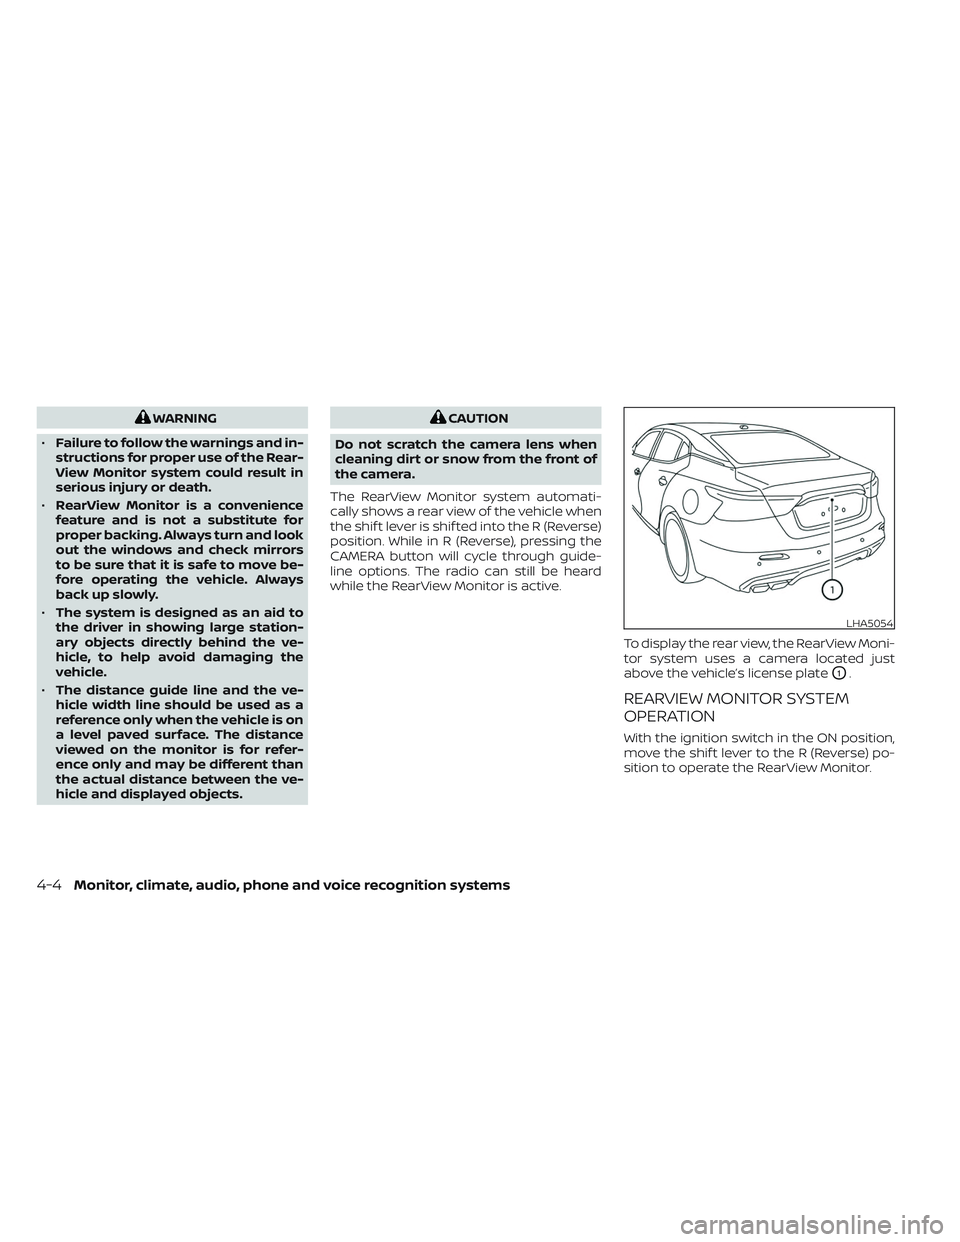 NISSAN MAXIMA 2023  Owners Manual WARNING
• Failure to follow the warnings and in-
structions for proper use of the Rear-
View Monitor system could result in
serious injury or death.
• RearView Monitor is a convenience
feature and